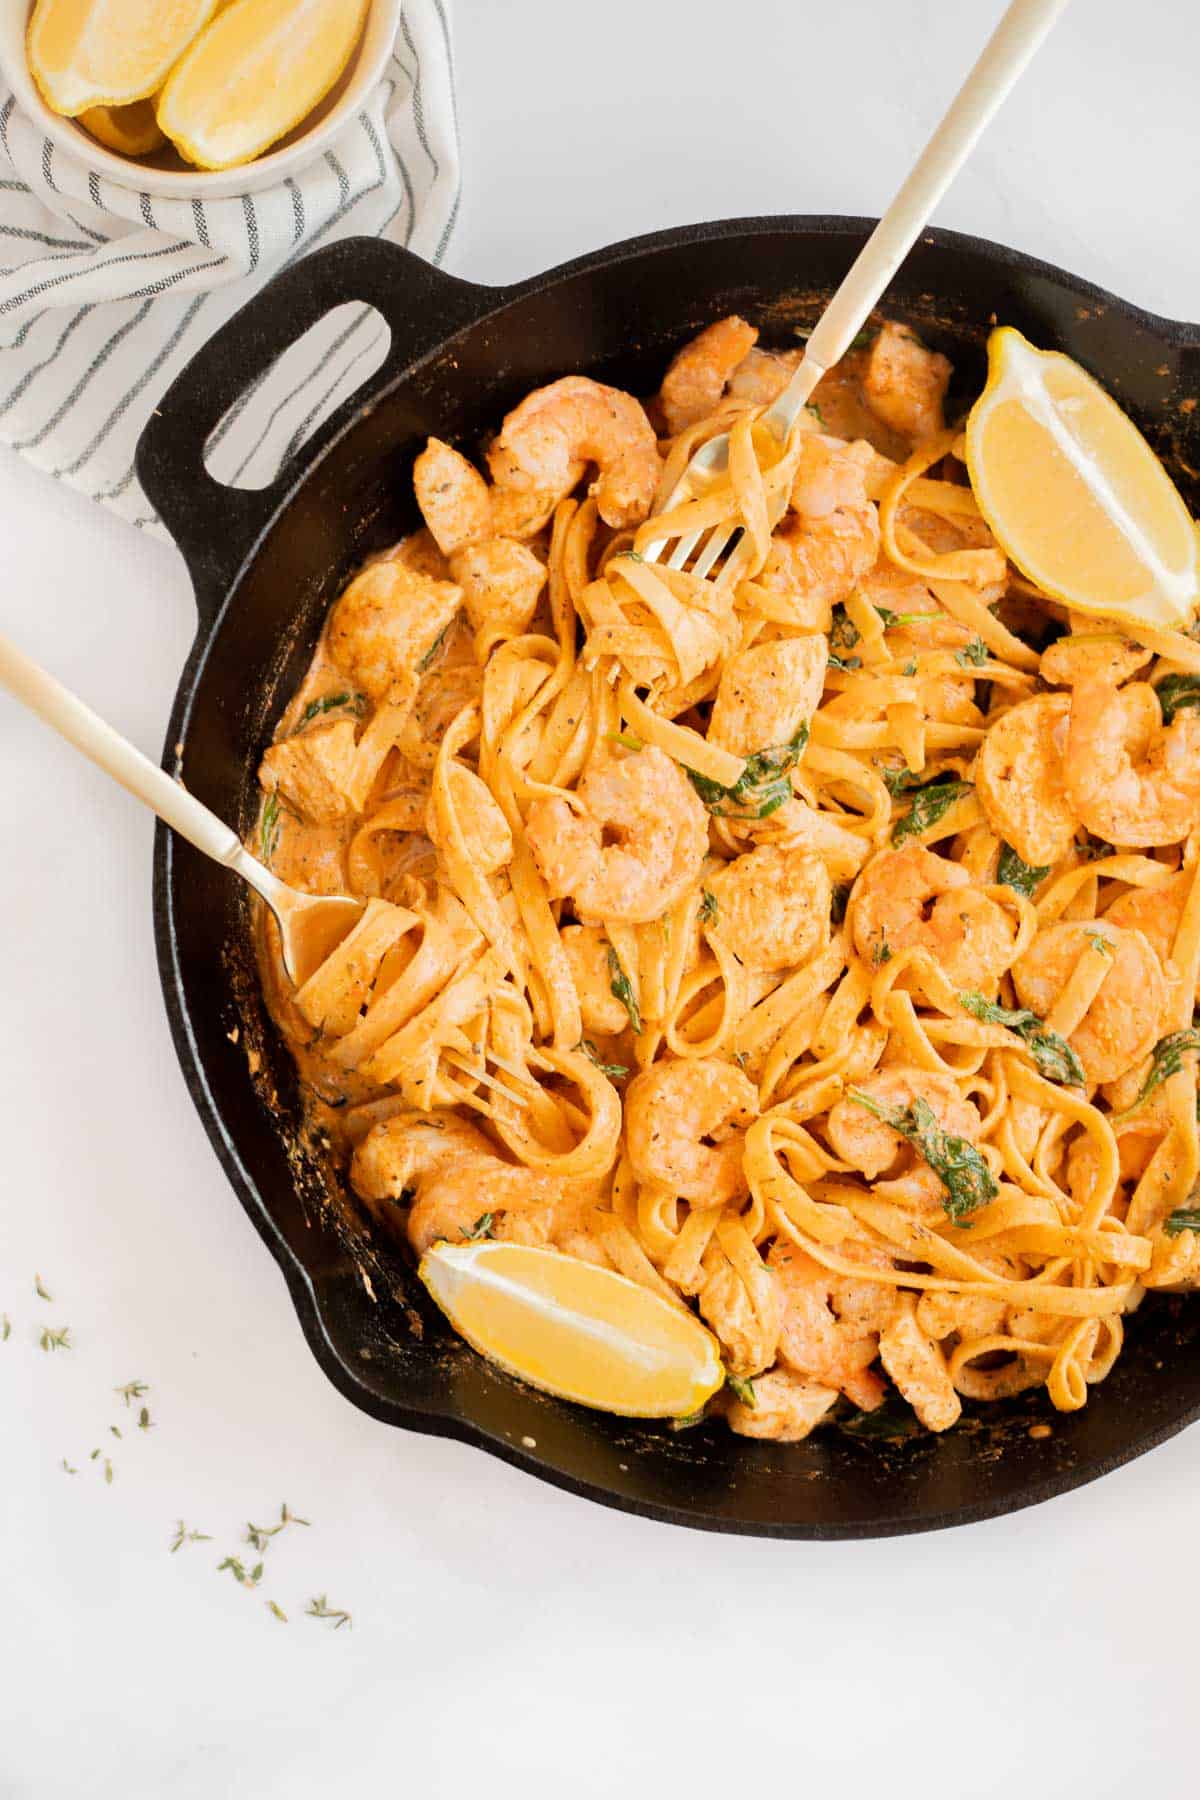 cajun chicken and shrimp pasta in a cast iron skillet with two gold forks.